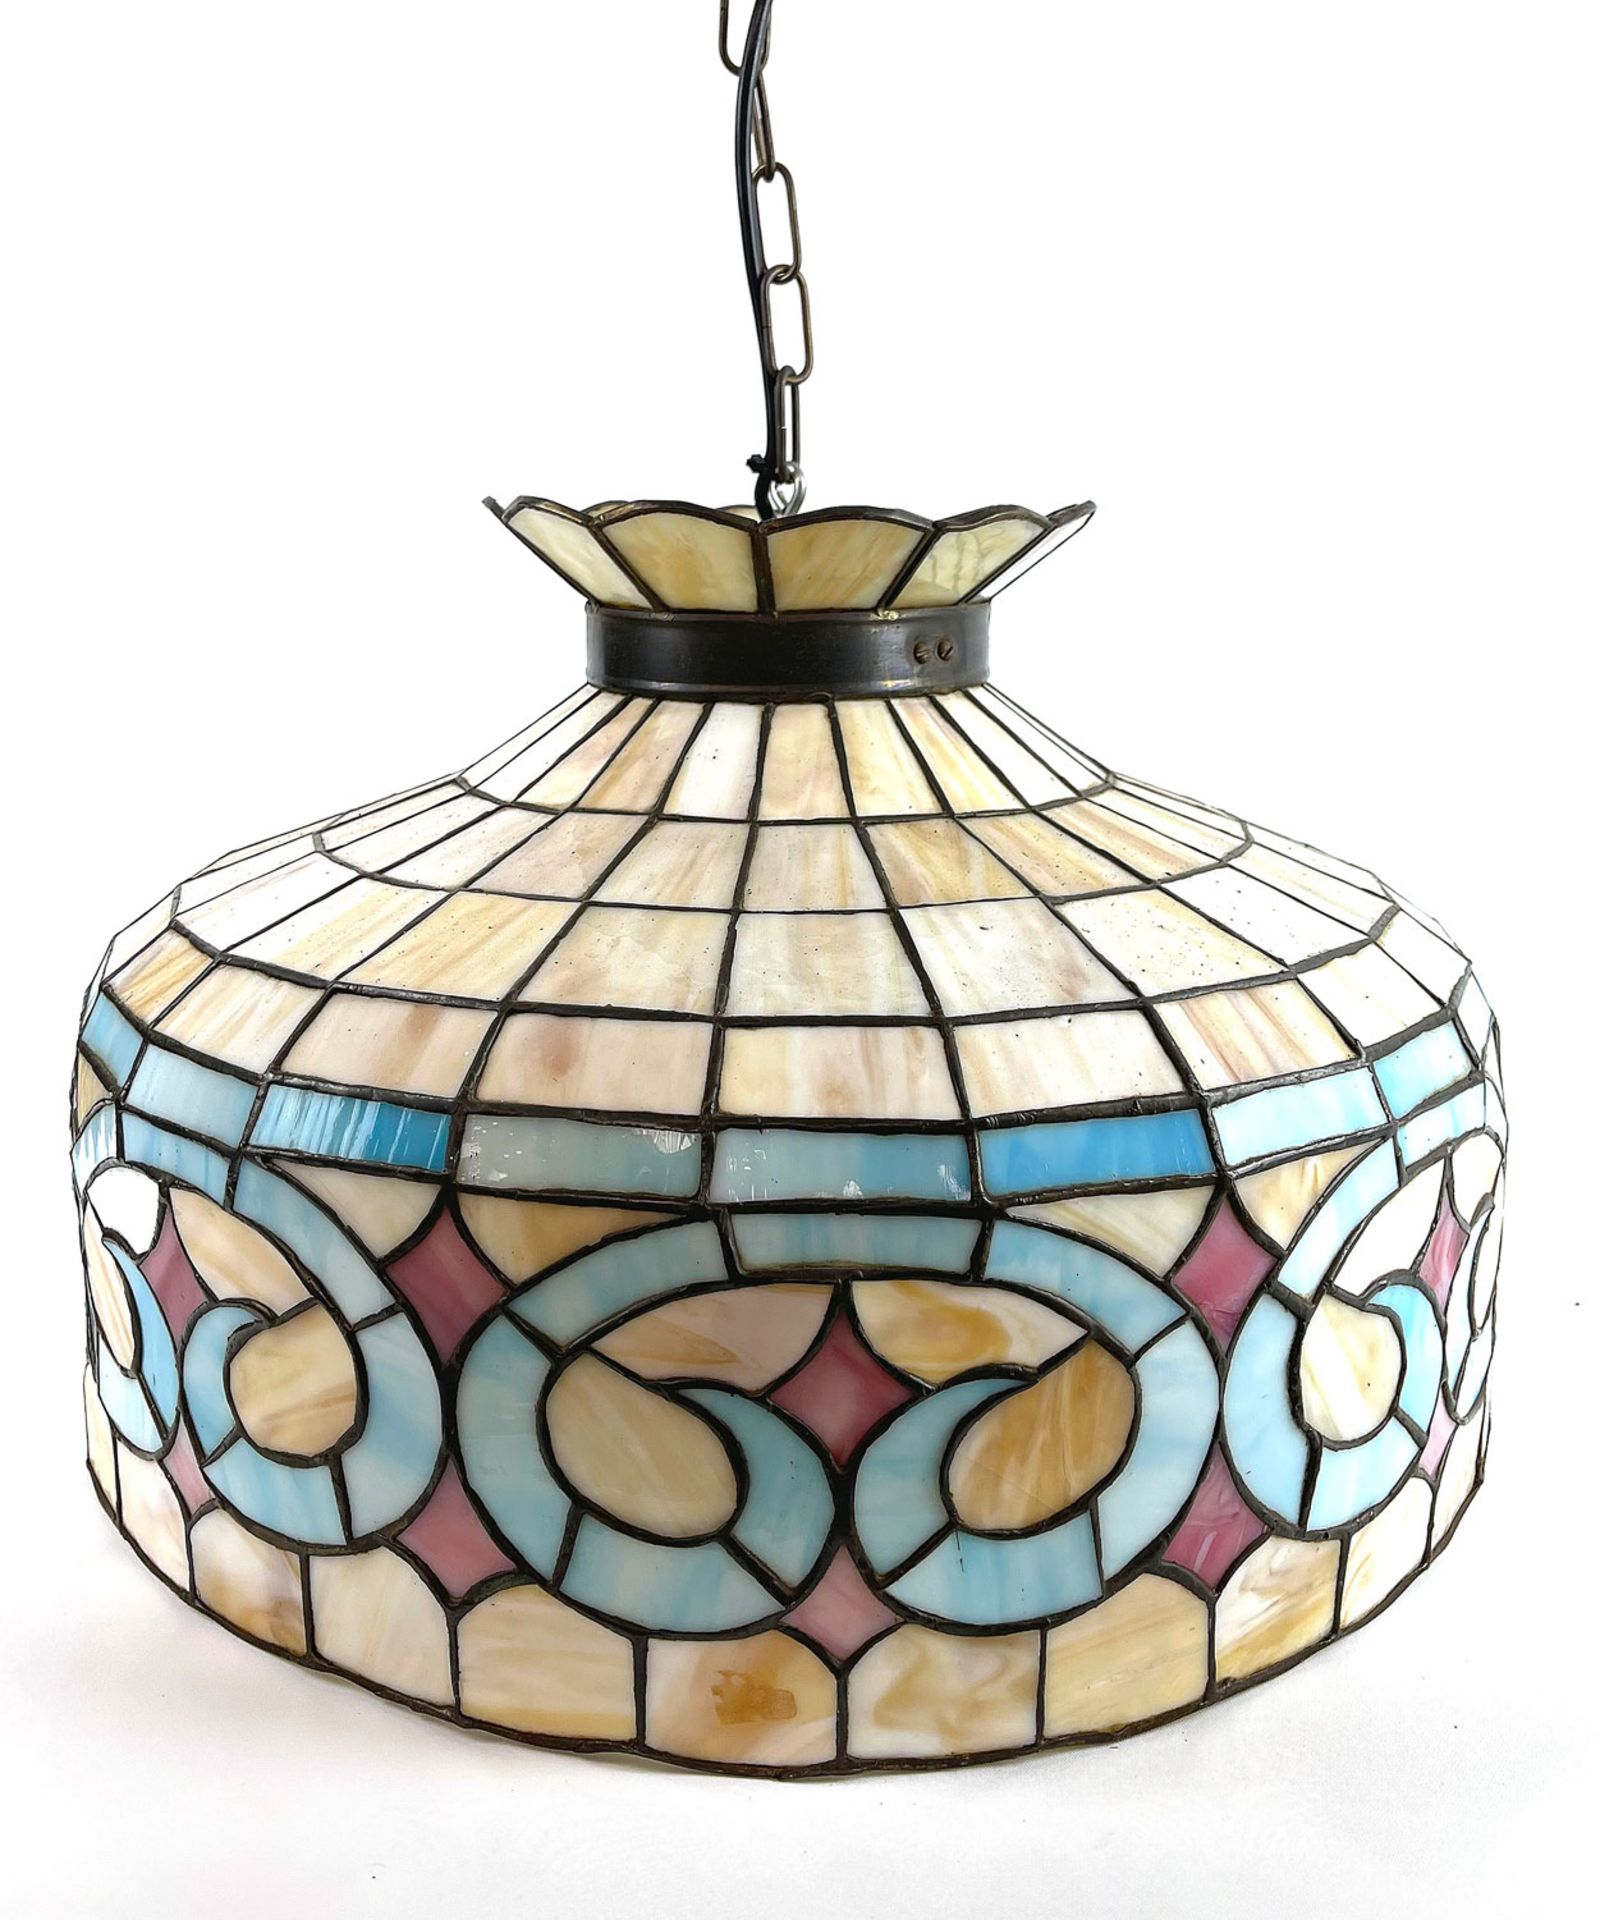 Tiffany Style Hanging Ceiling Lamp with Blue Pattern